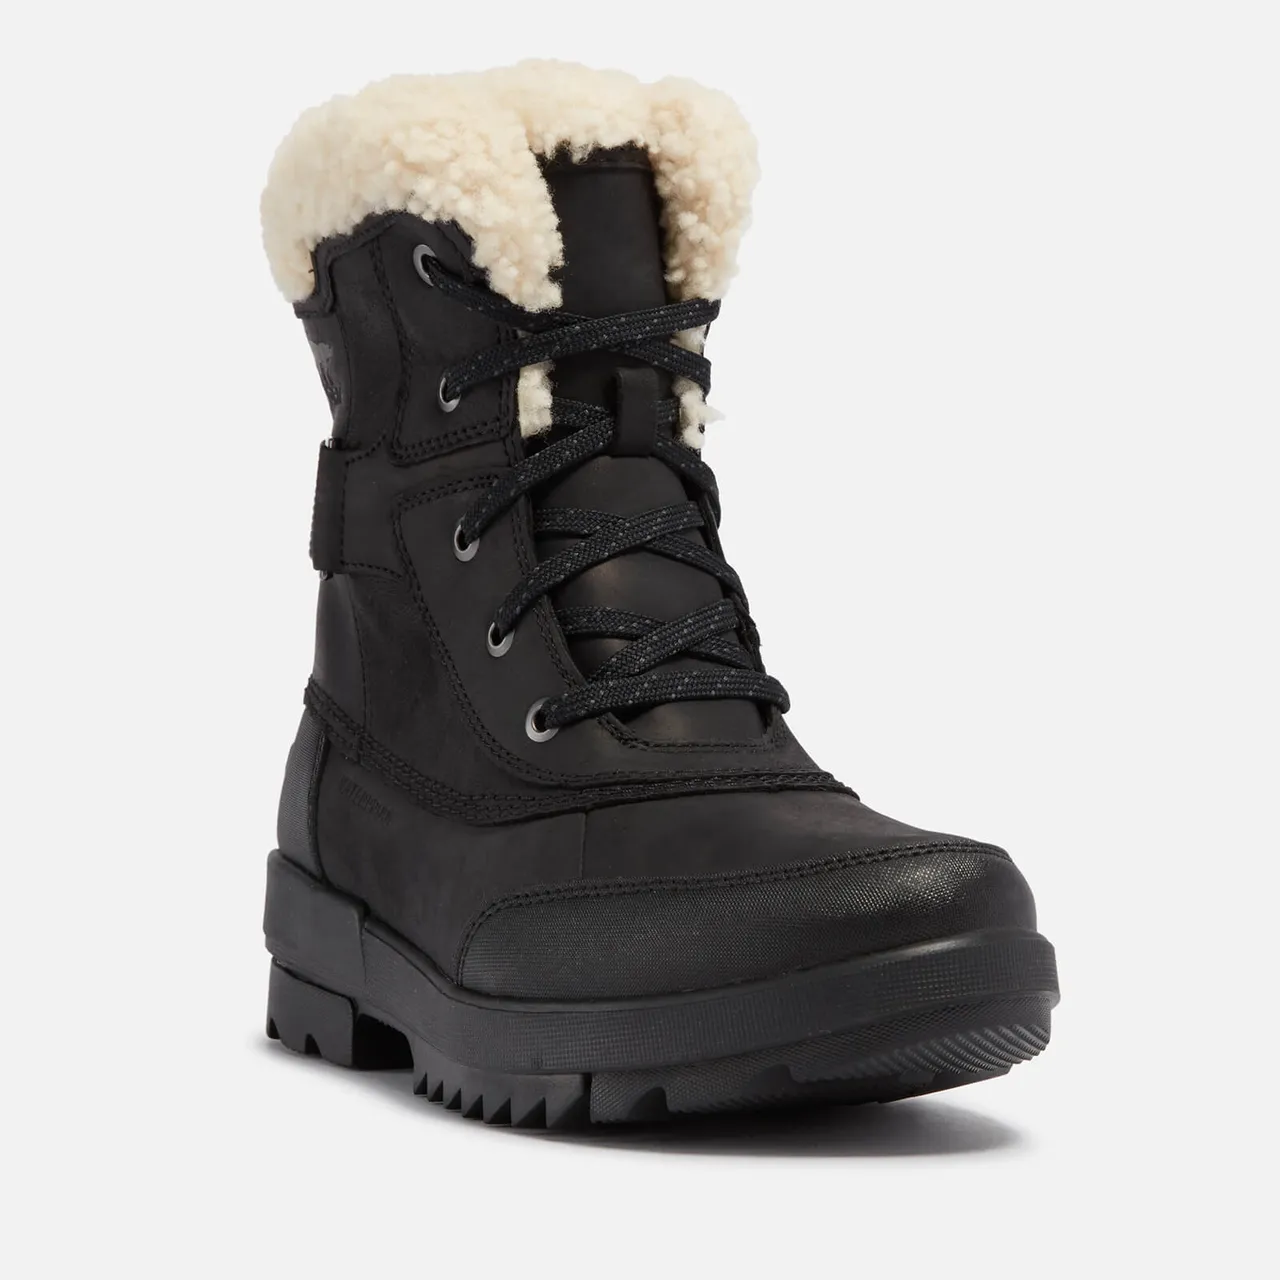 Sorel Torino Ii Parc Shearling, Rubber and Leather Boots - UK